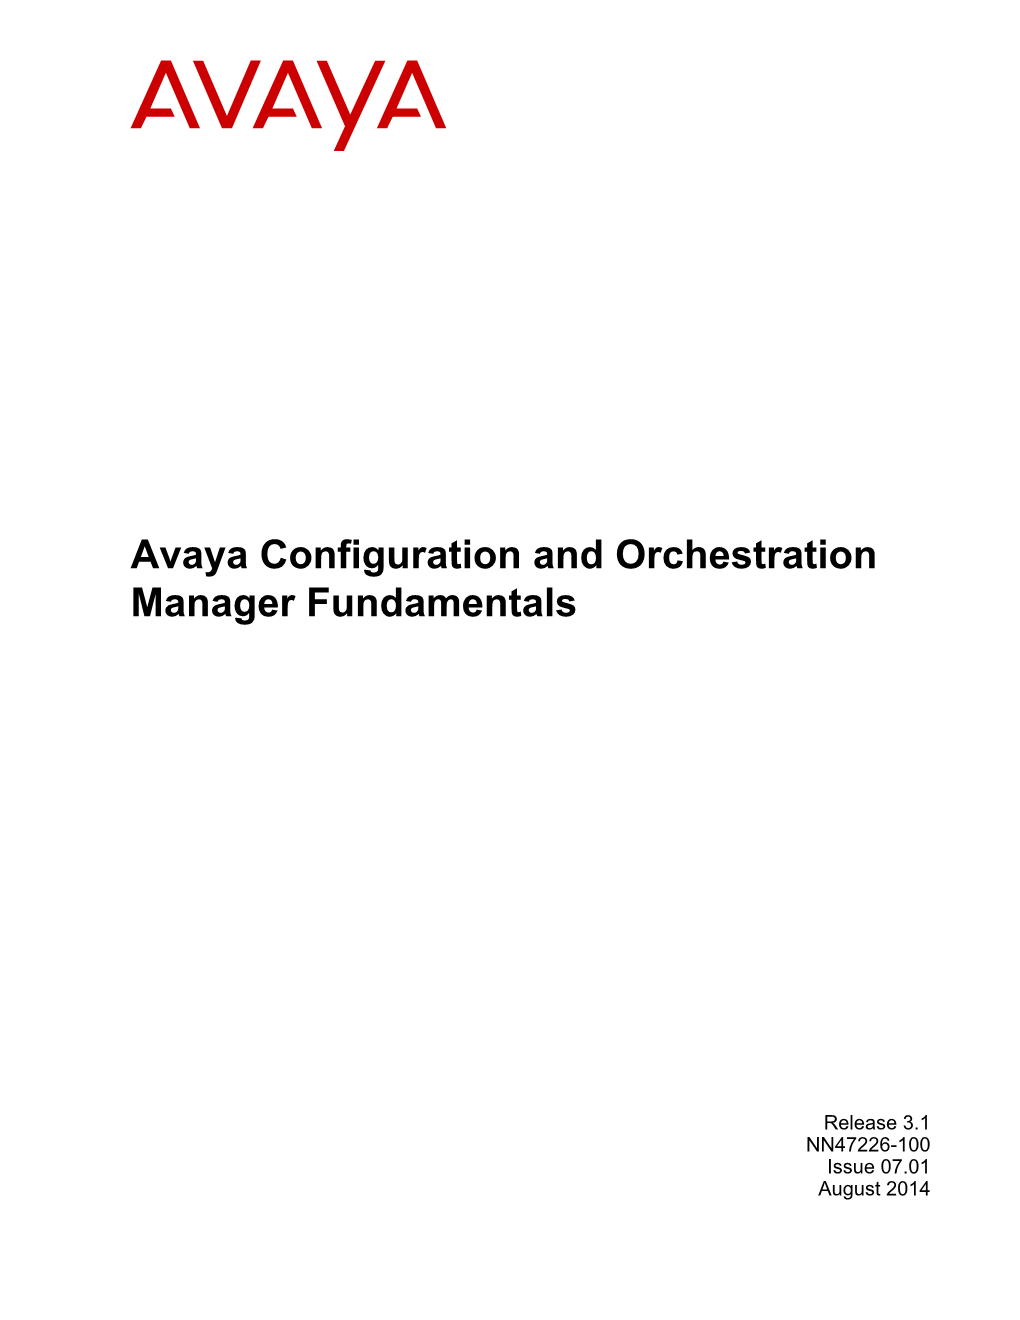 Avaya Configuration and Orchestration Manager Fundamentals